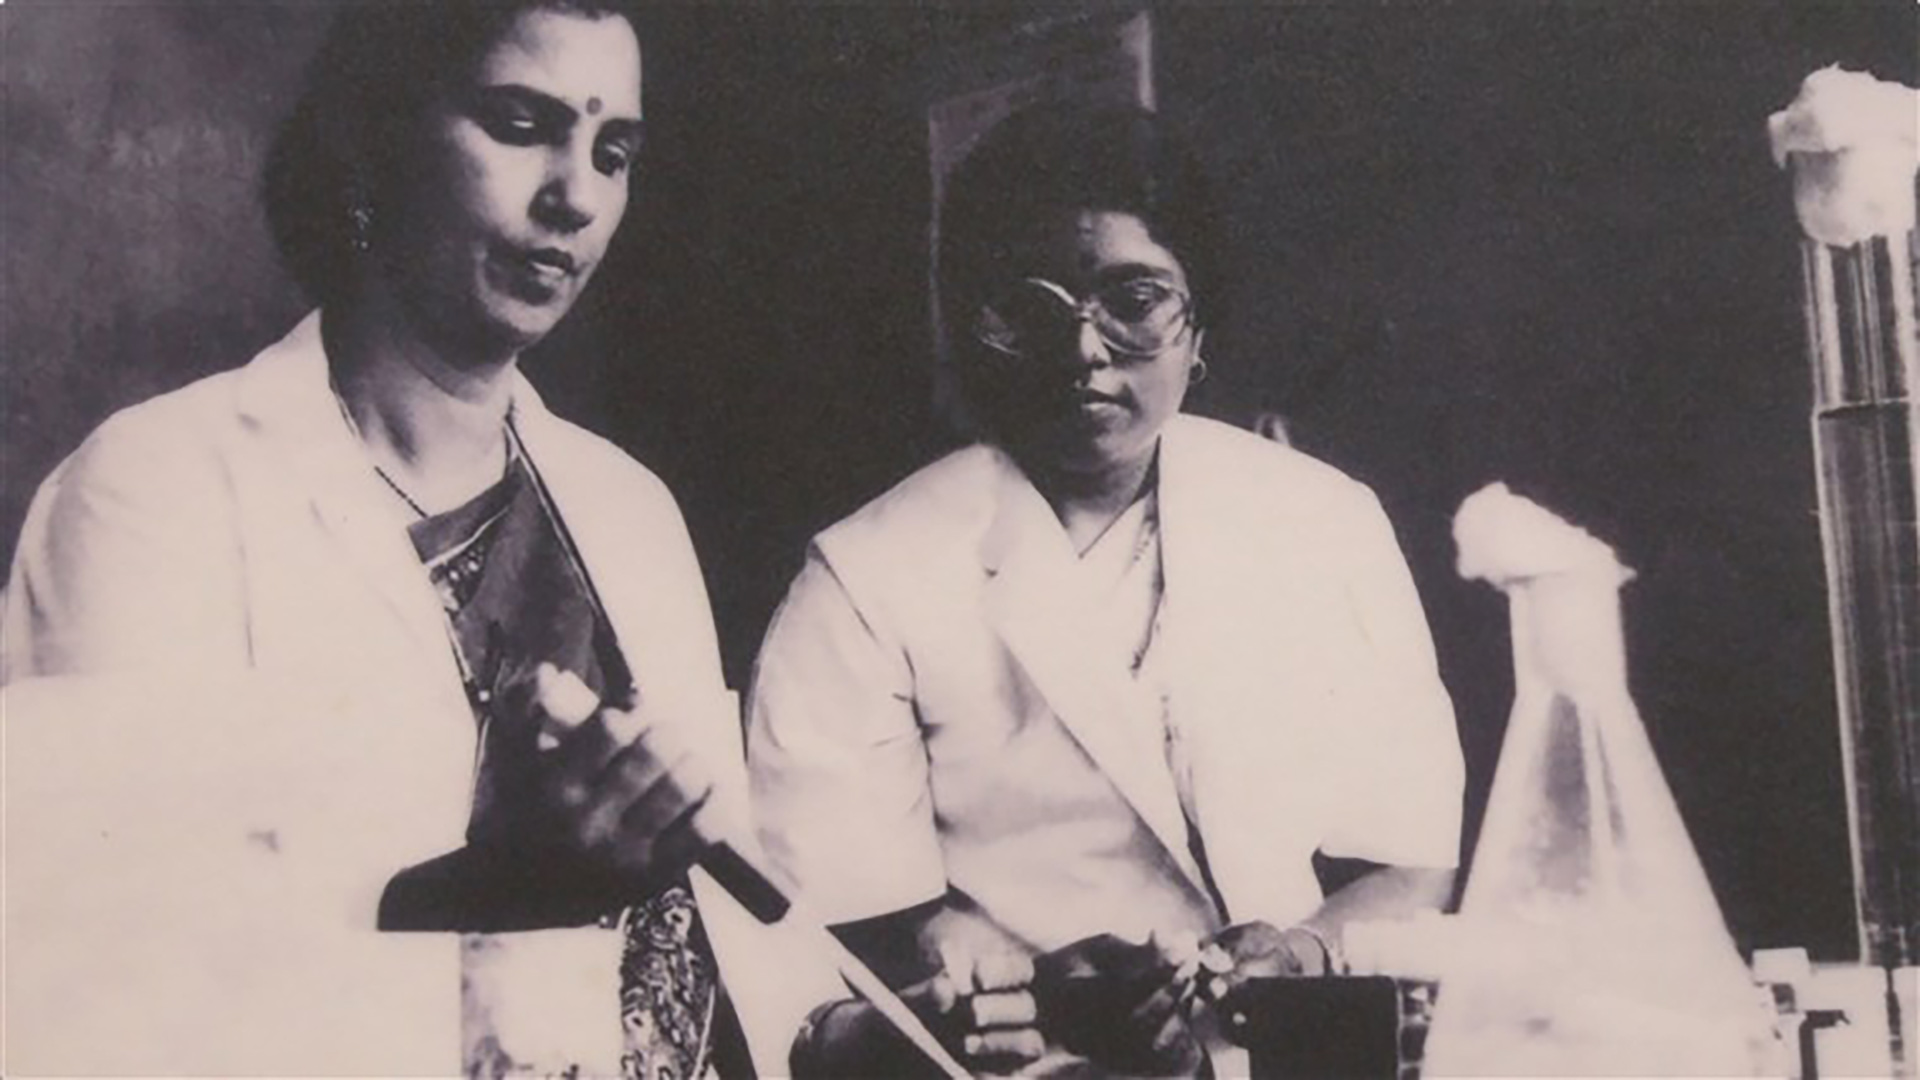 vintage photo of two Indian women in lab coats performing an experiment